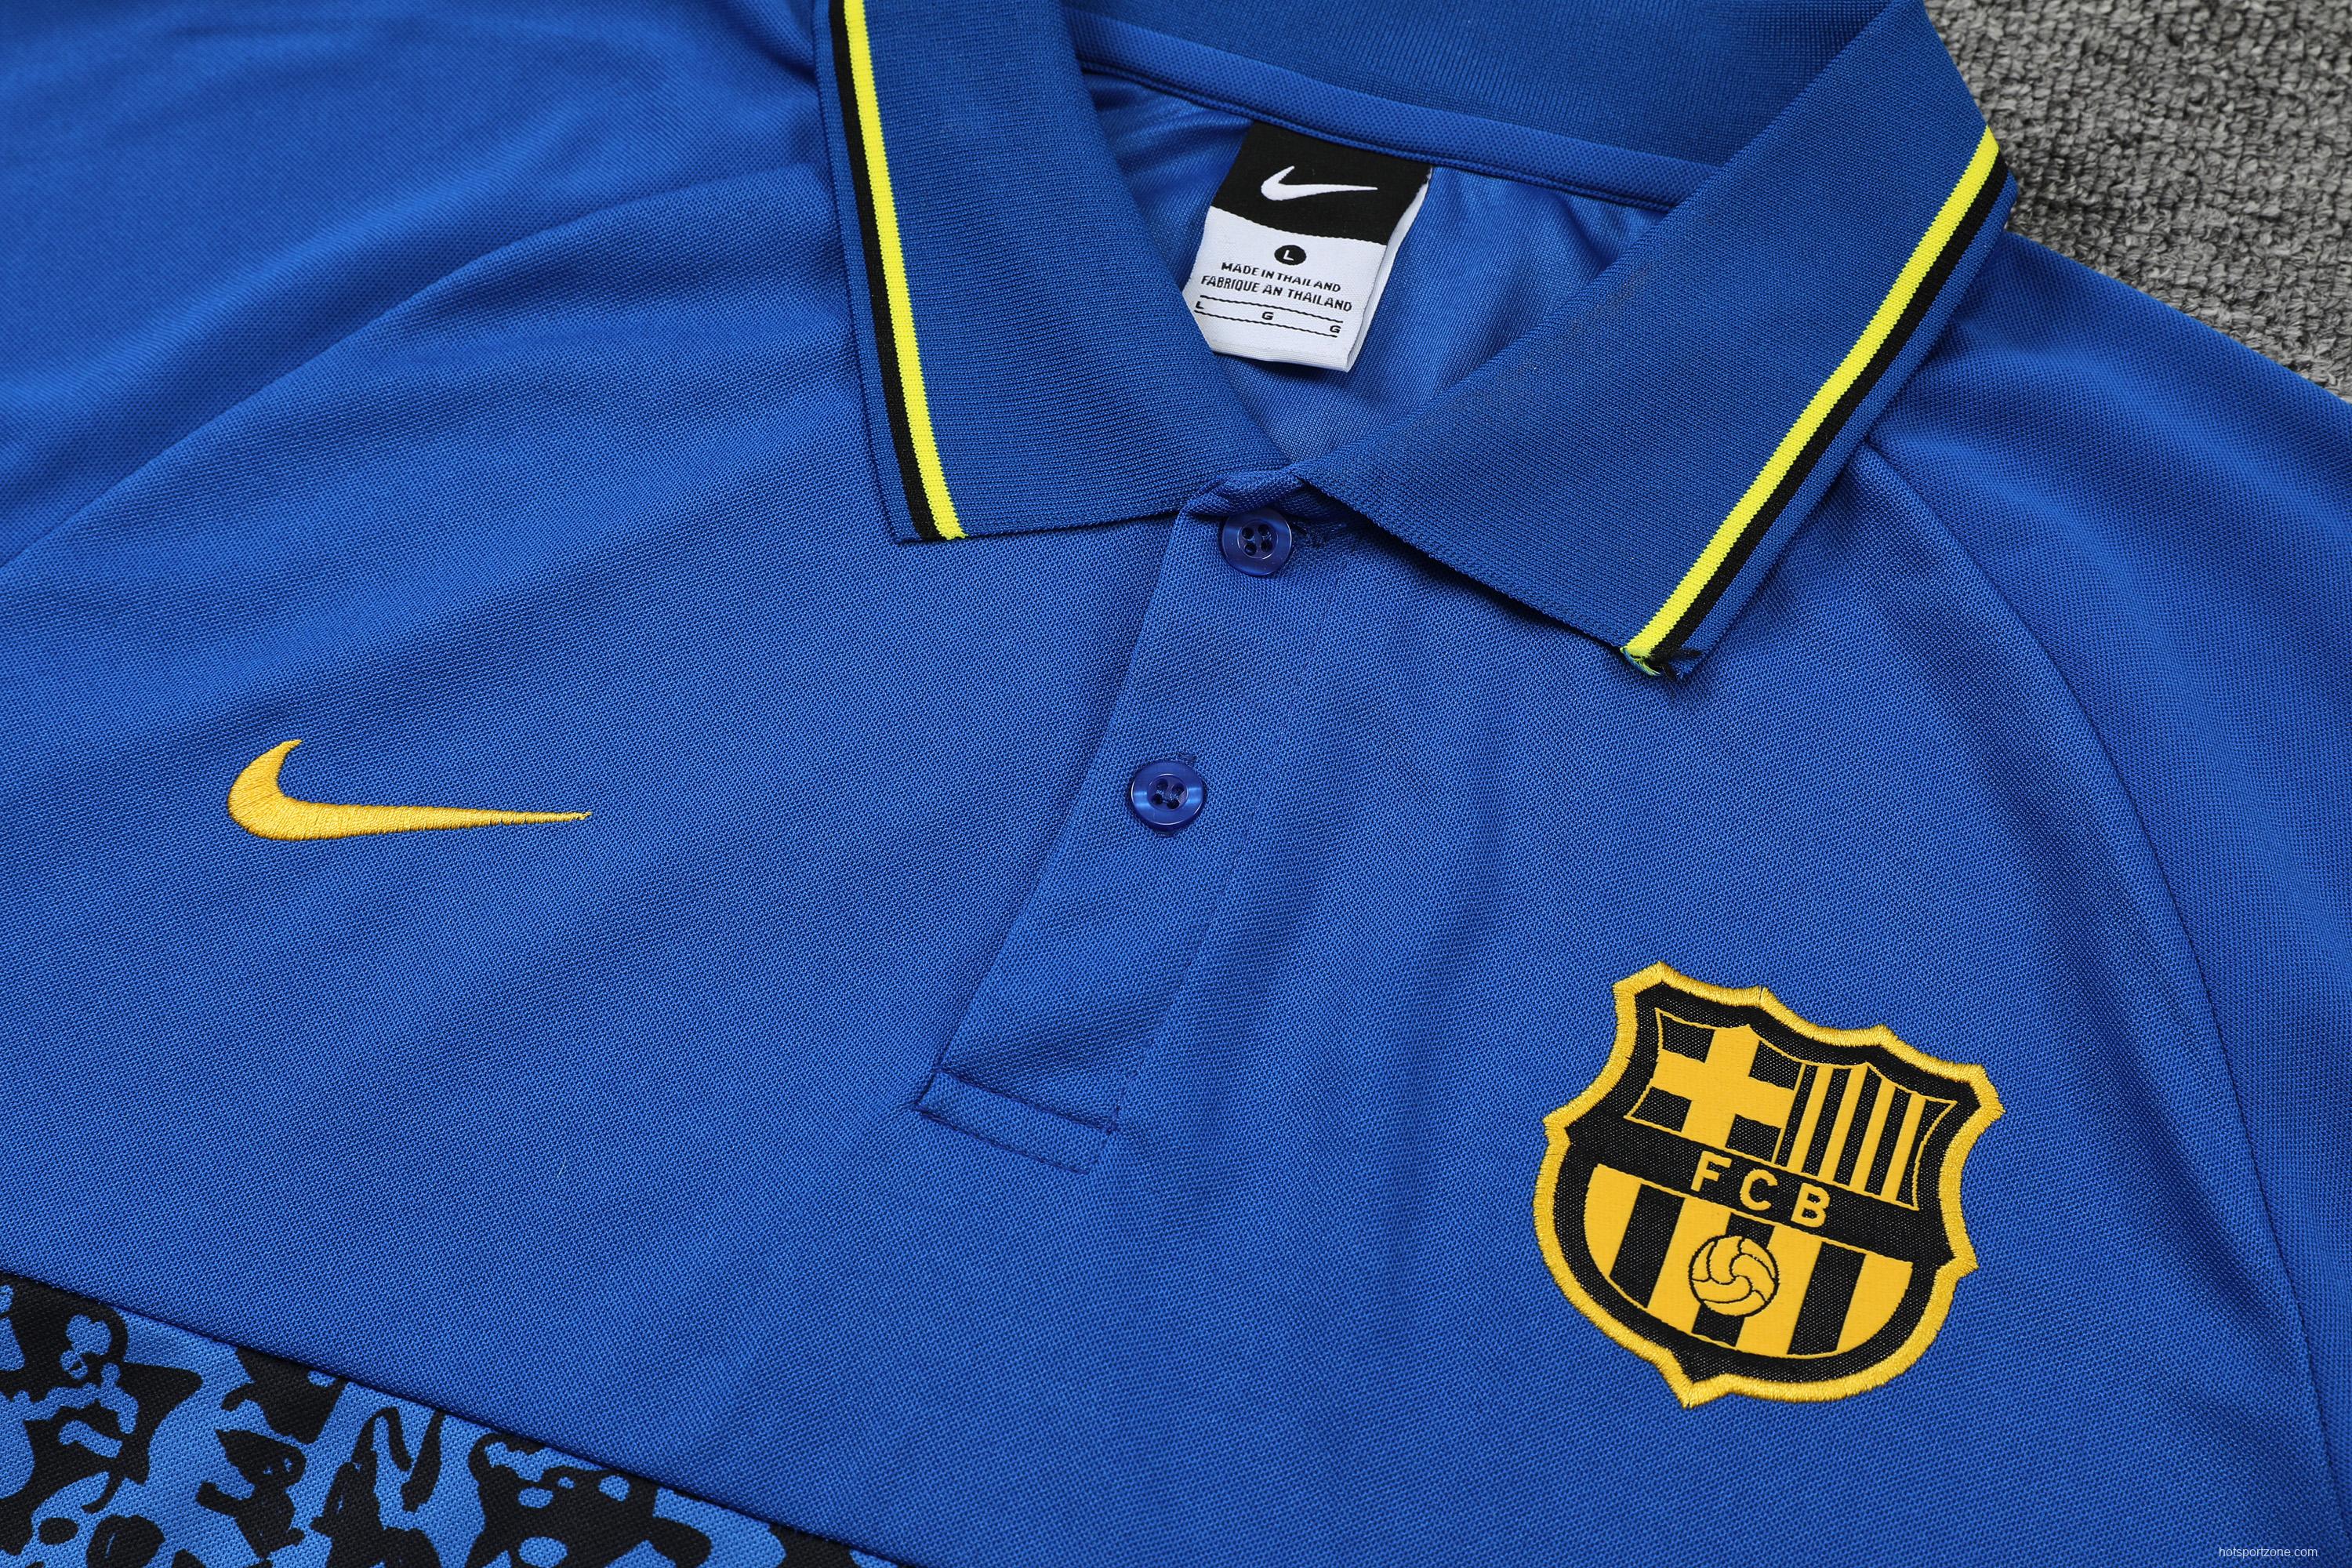 Barcelona POLO kit dark blue (not supported to be sold separately)